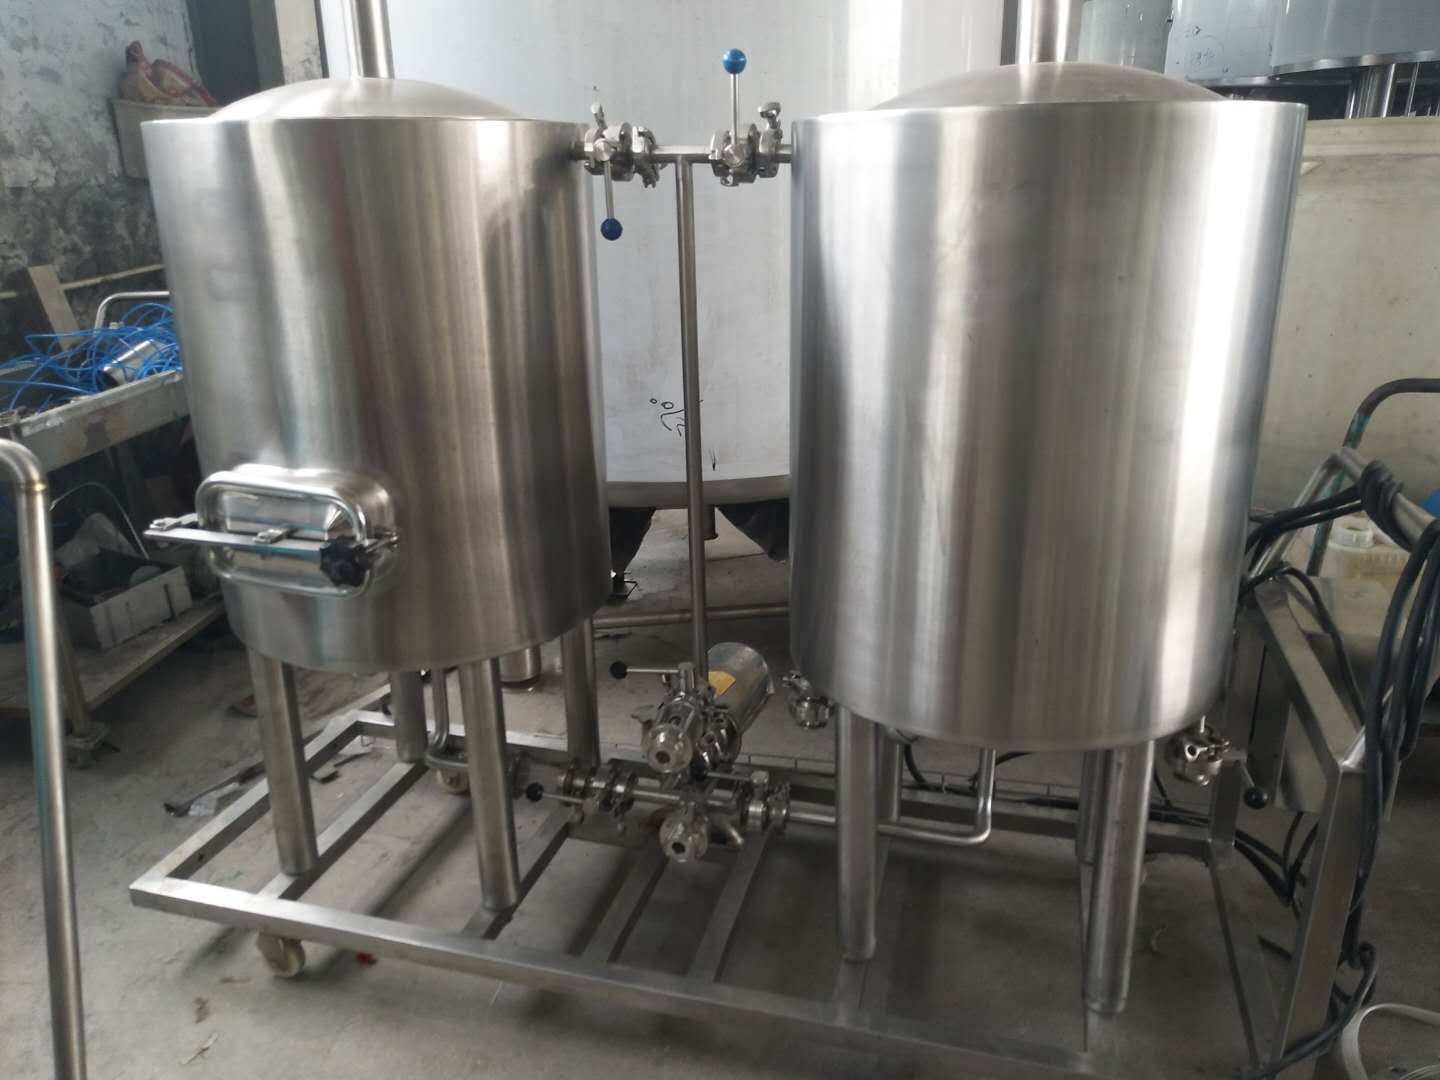 USA high quality 30-50L home beer brewing equipment of stainless steel 304 from China manufacturer  W1